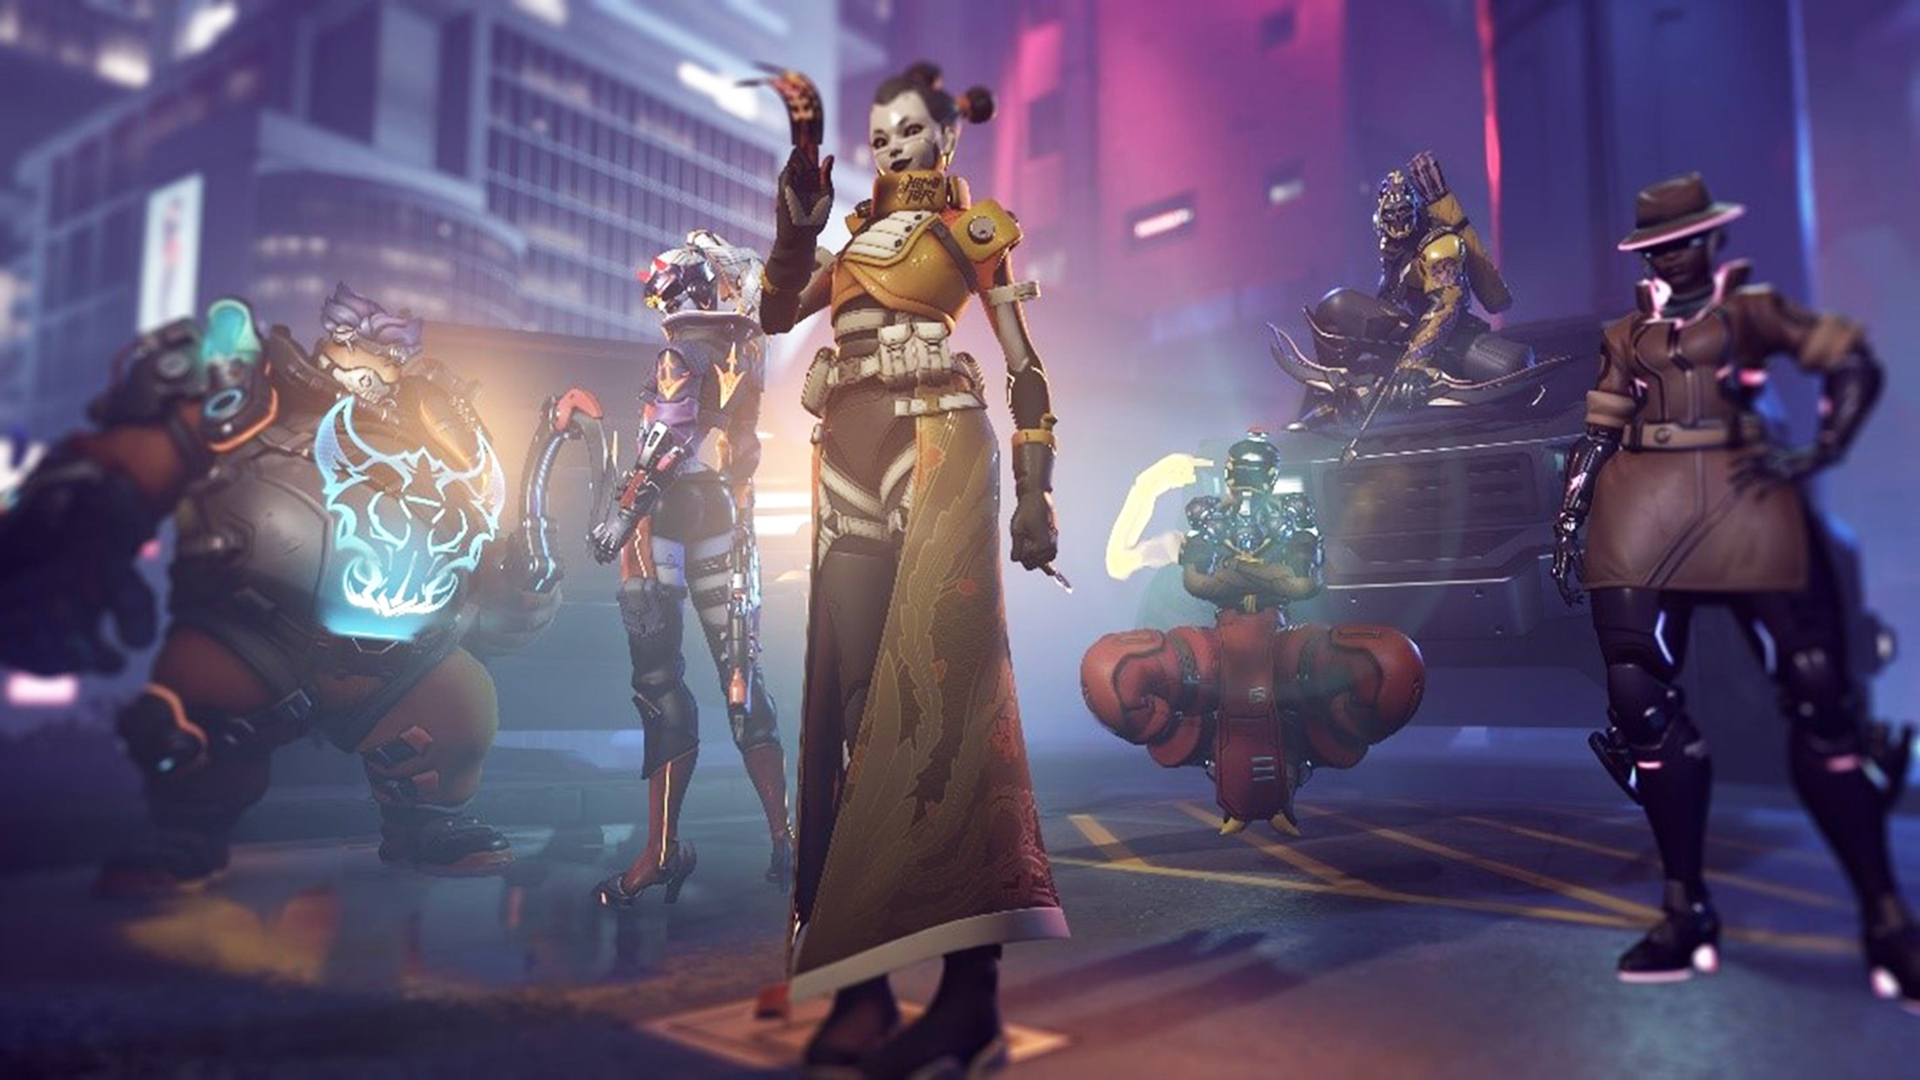  If you've been ranked too low in Overwatch 2, it might not be your fault 